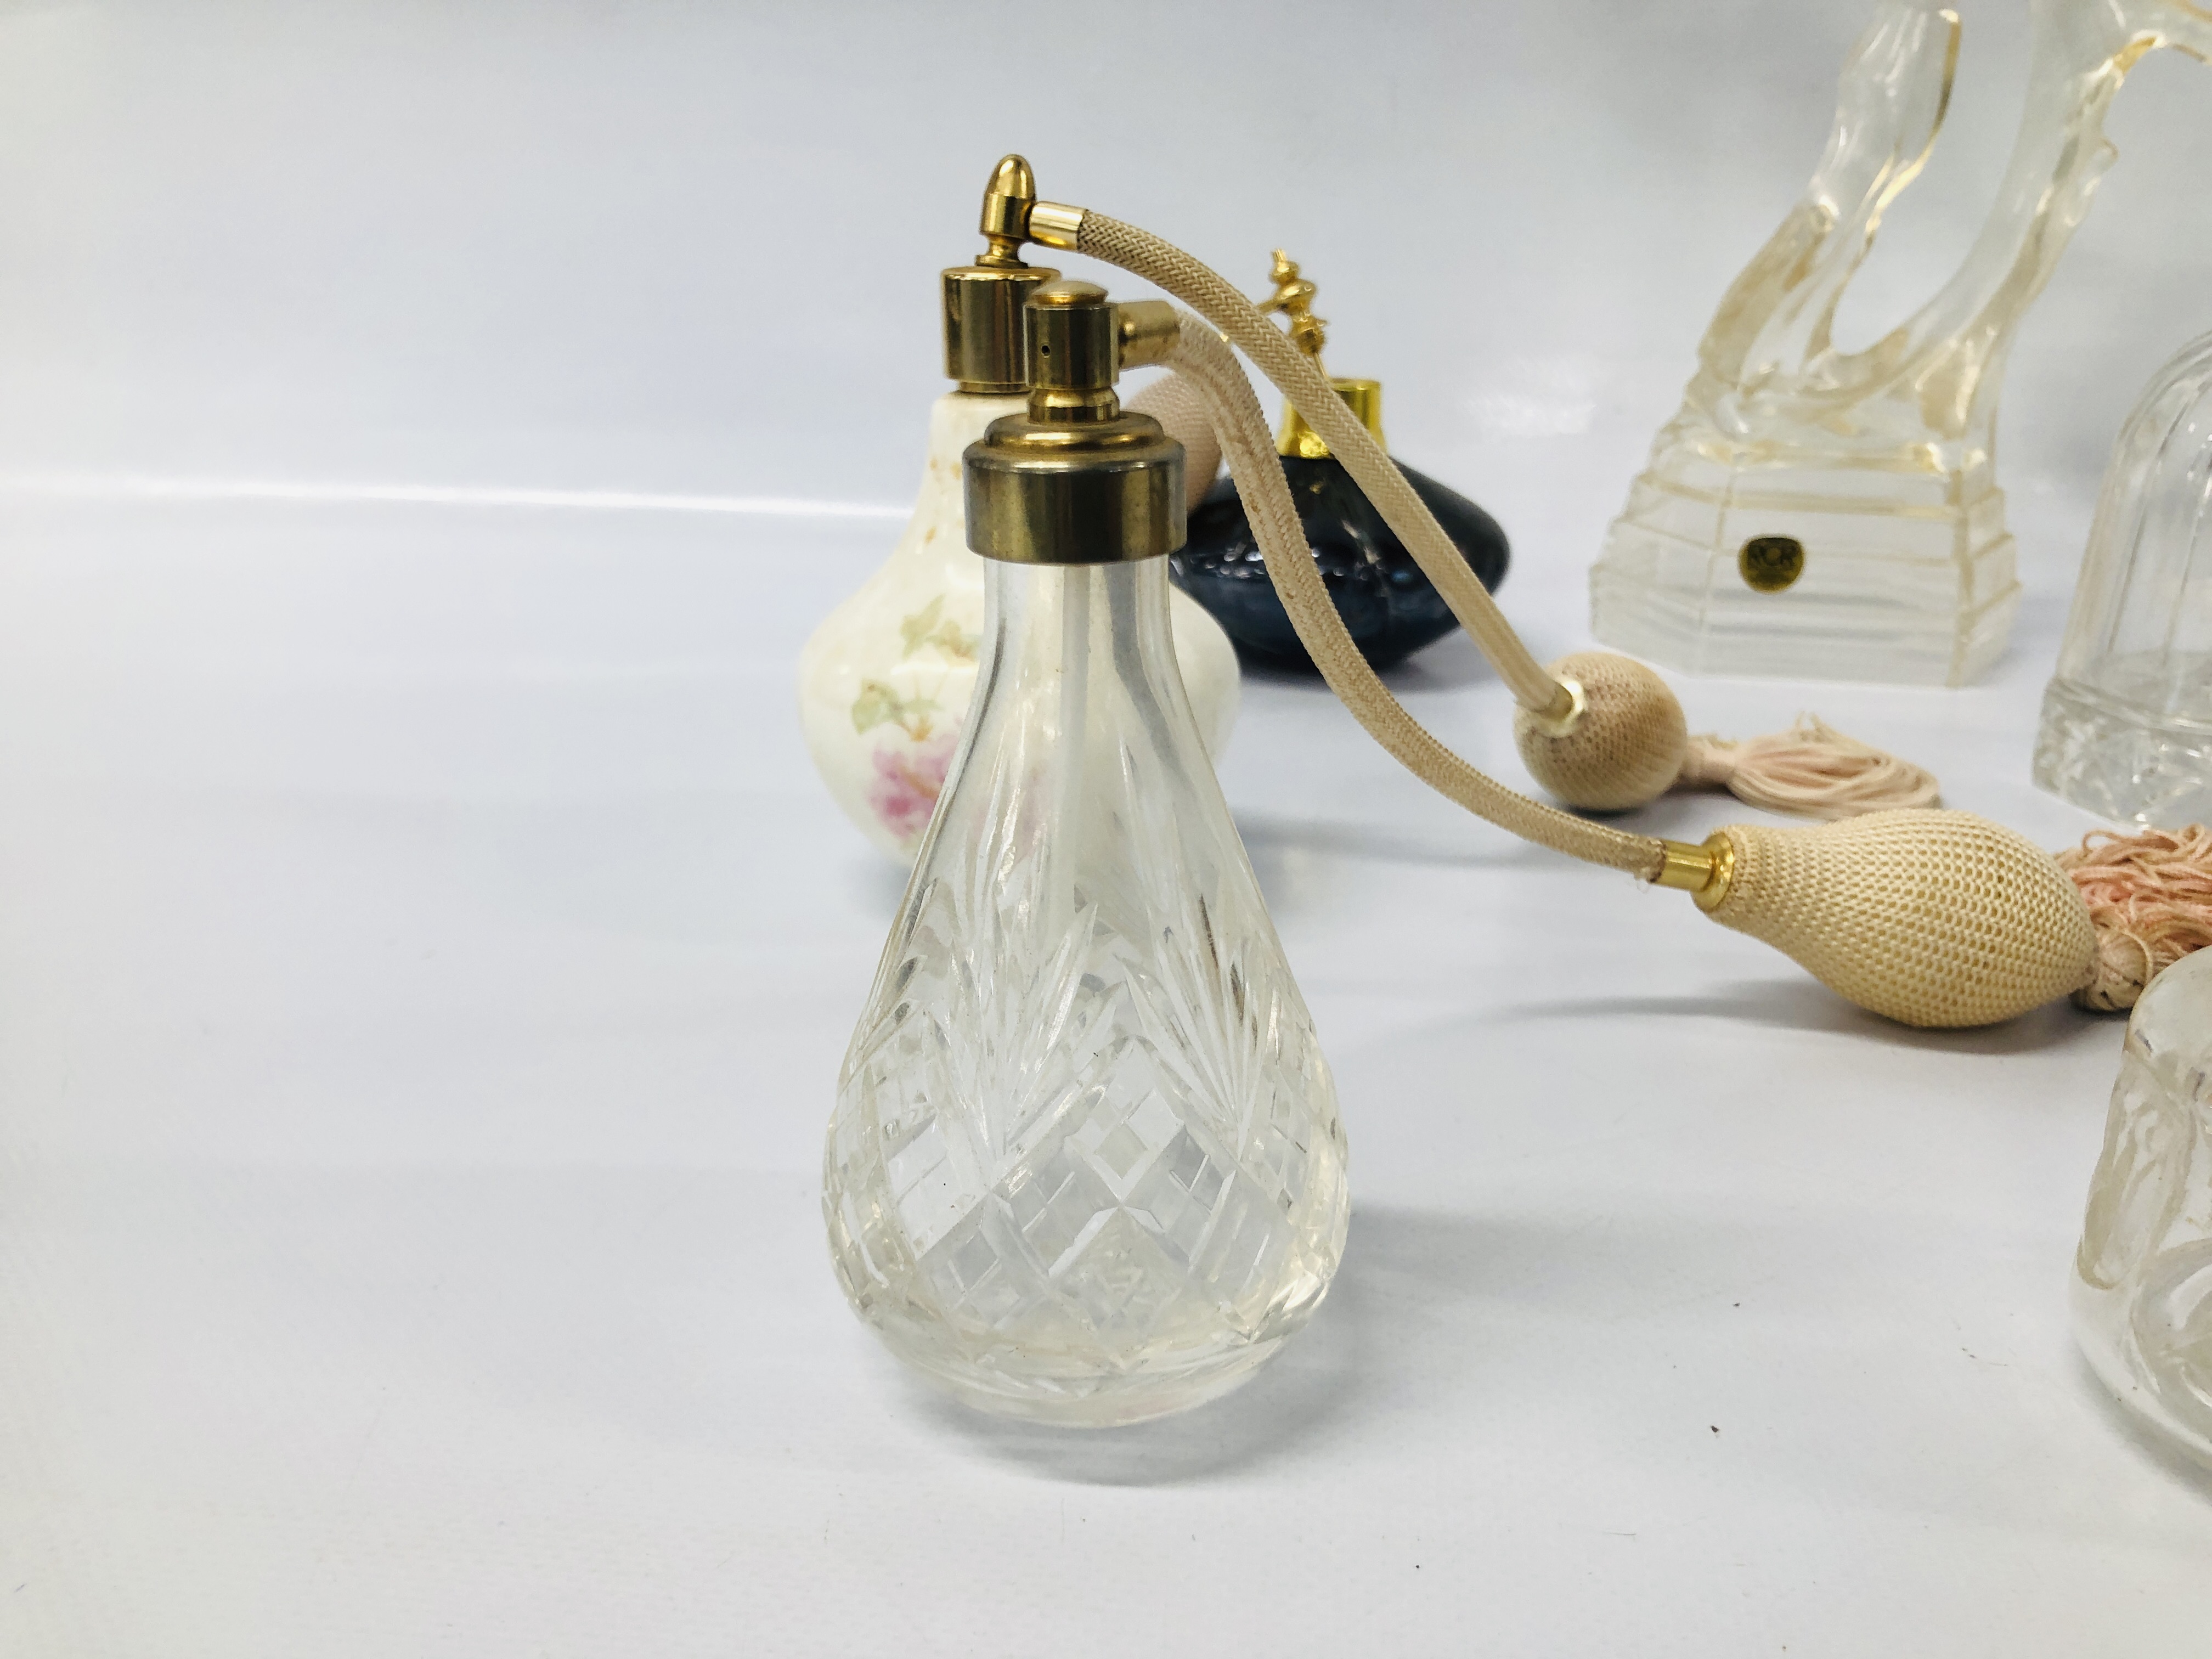 6 X ASSORTED PERFUME BOTTLES, RCR CRYSTAL DANCING GROUP, VINTAGE GLASS DRESSING TABLE CLOCK, ETC. - Image 2 of 12